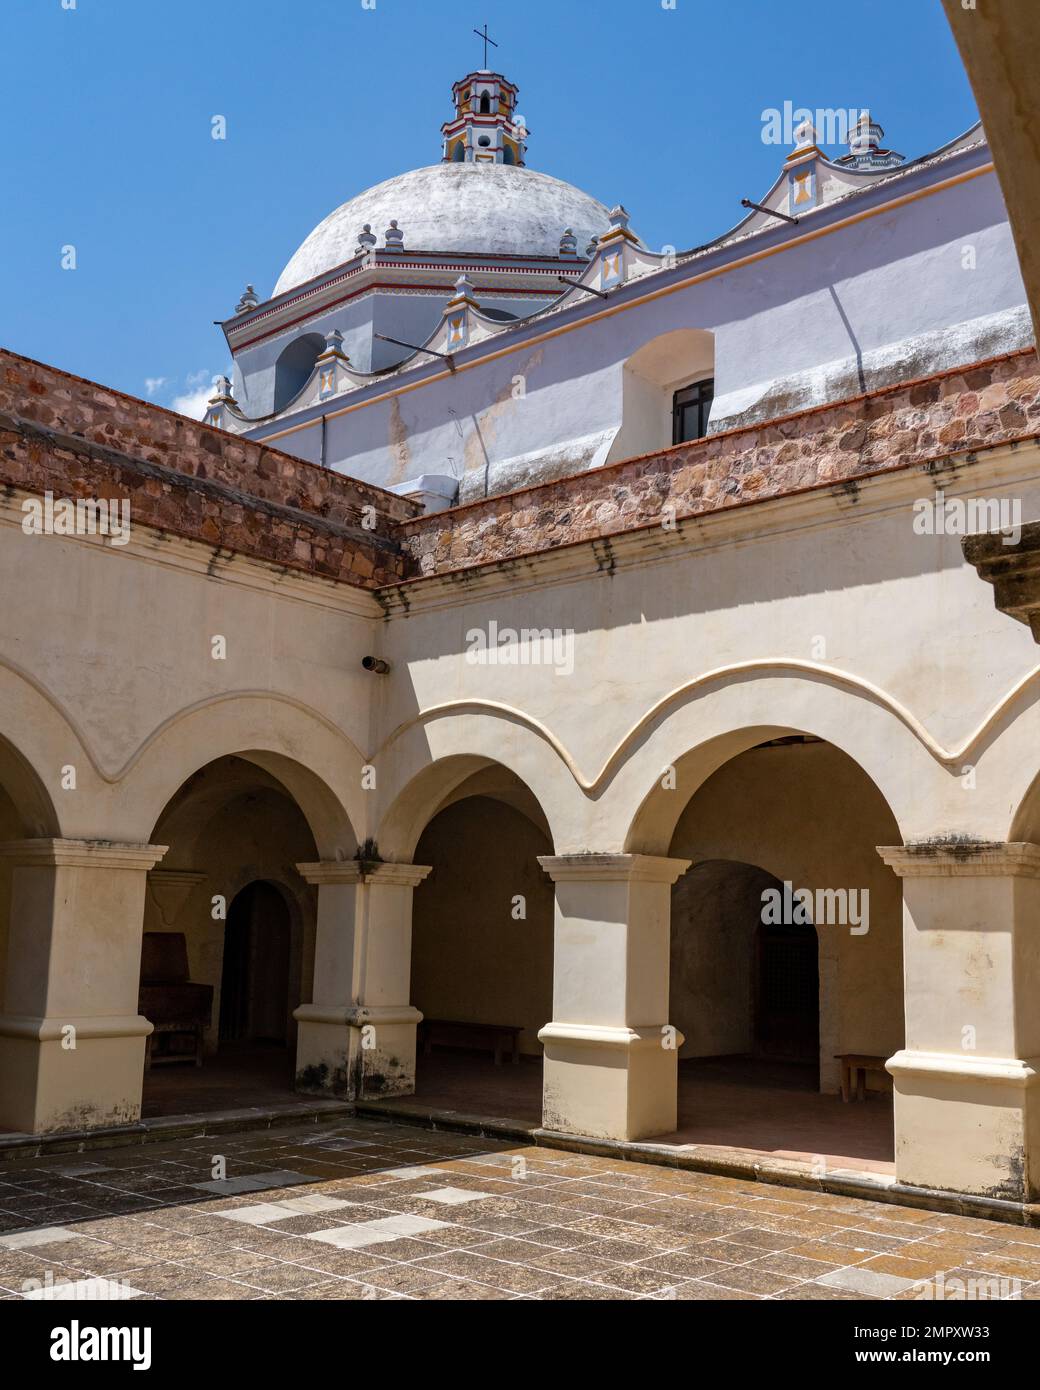 Arches and colonnades of the former monastery of Santo Domingo in Ocotlan de Morelos, Oaxaca, Mexico.  Now a museum.  Behind is the dome of the dome o Stock Photo